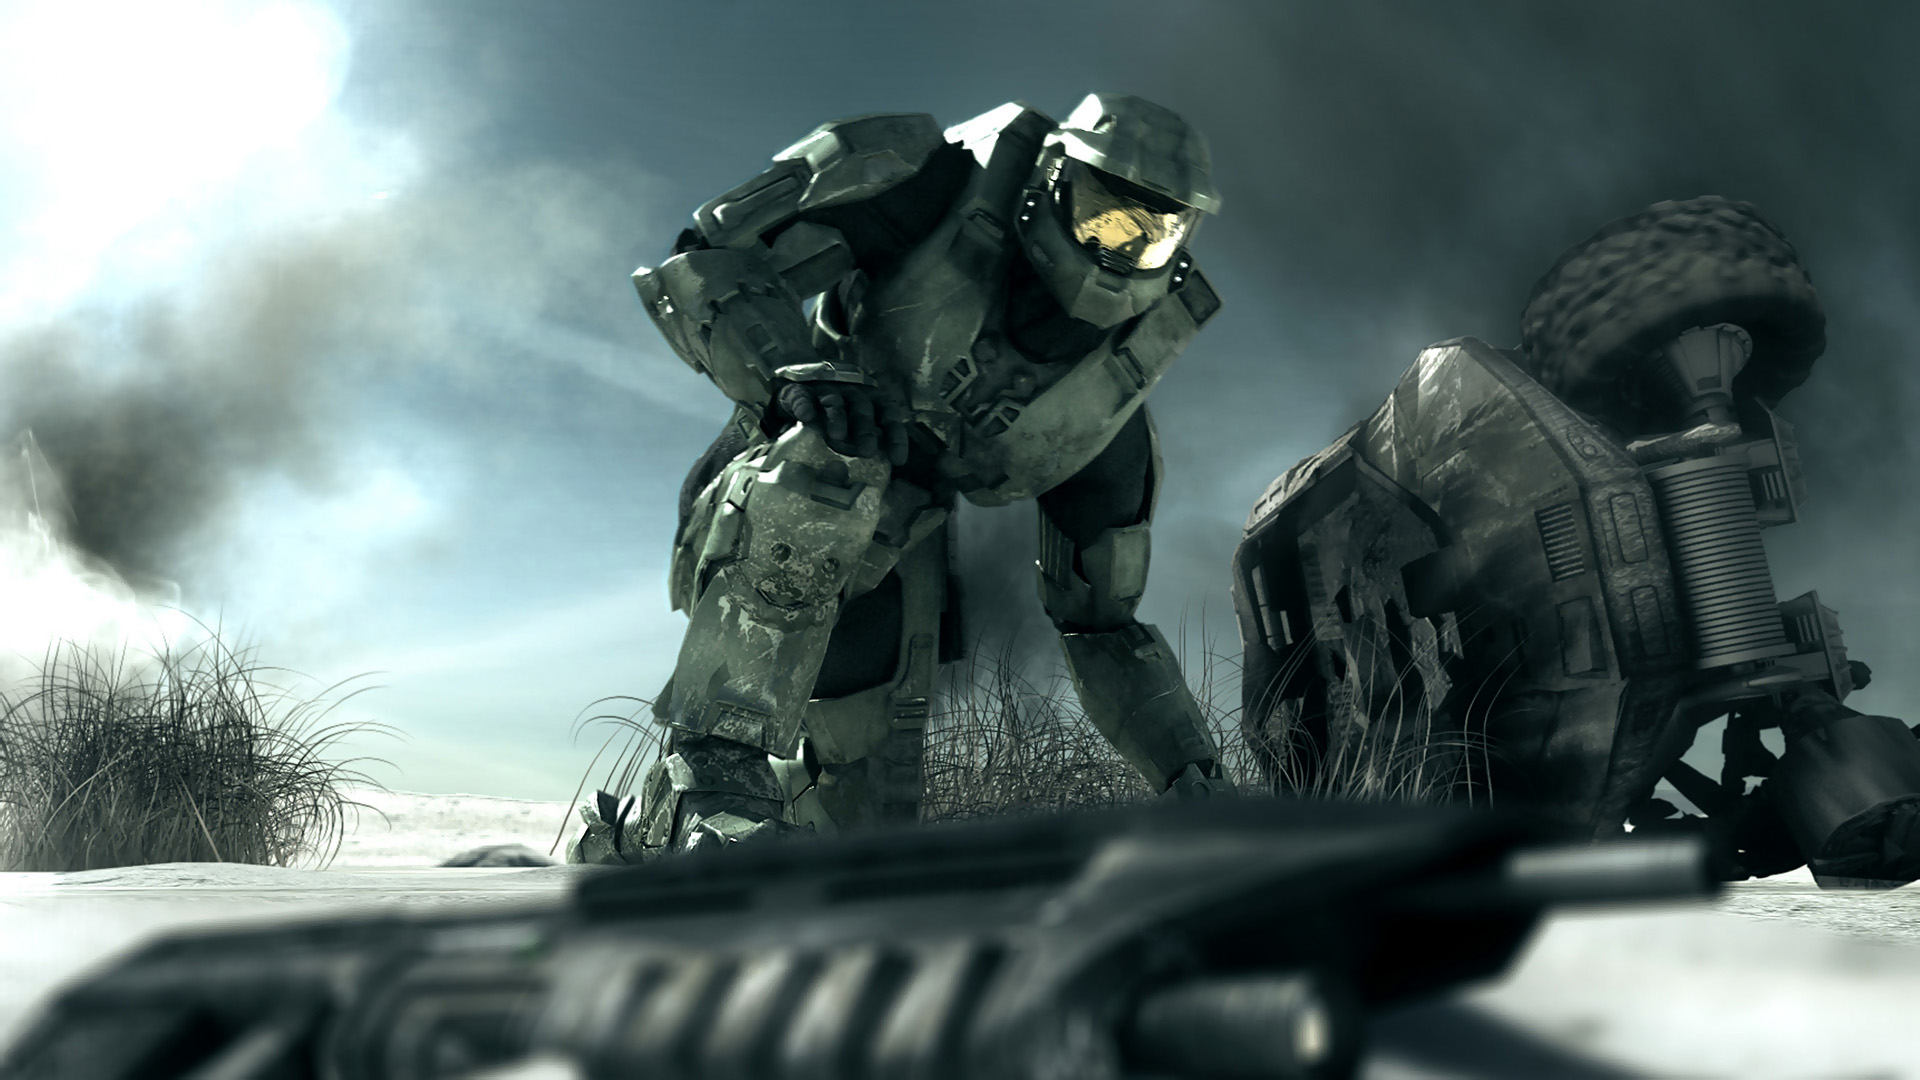 6 Halo: Combat Evolved HD Wallpapers | Backgrounds - Wallpaper Abyss